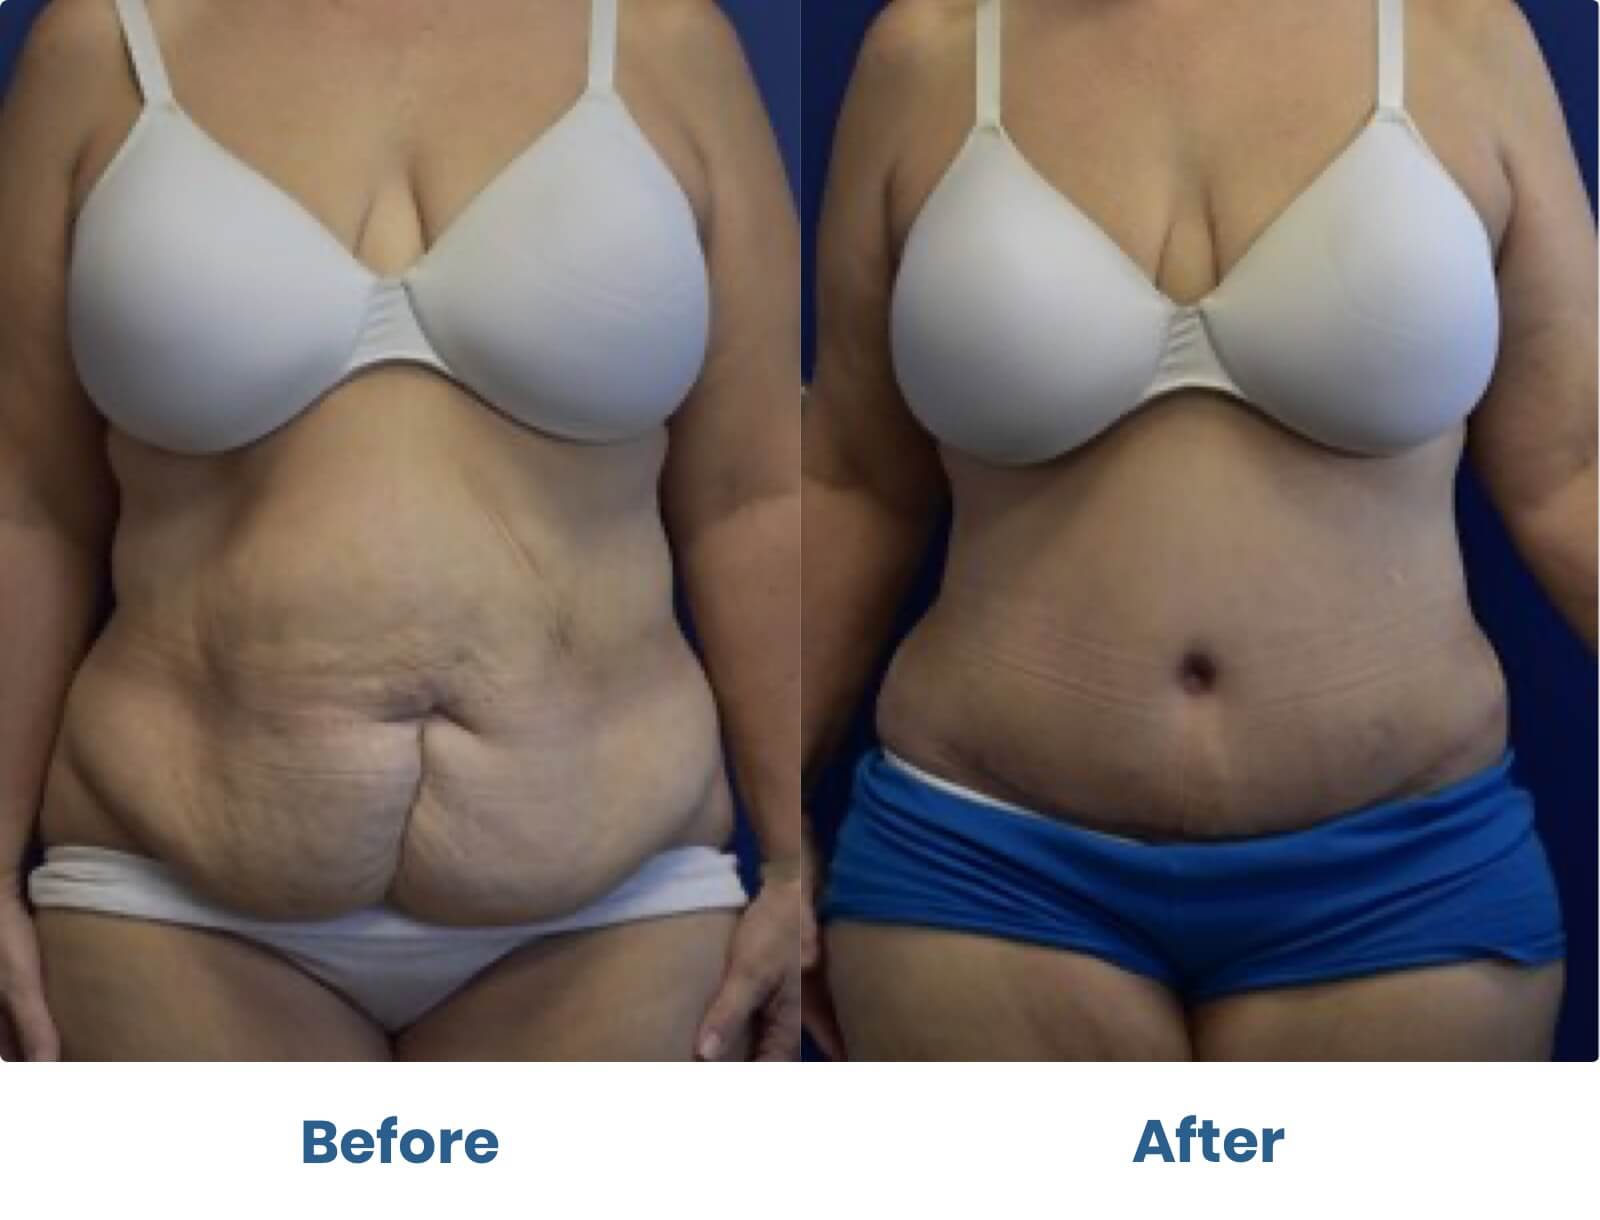 Before and after photos of tummy tuck